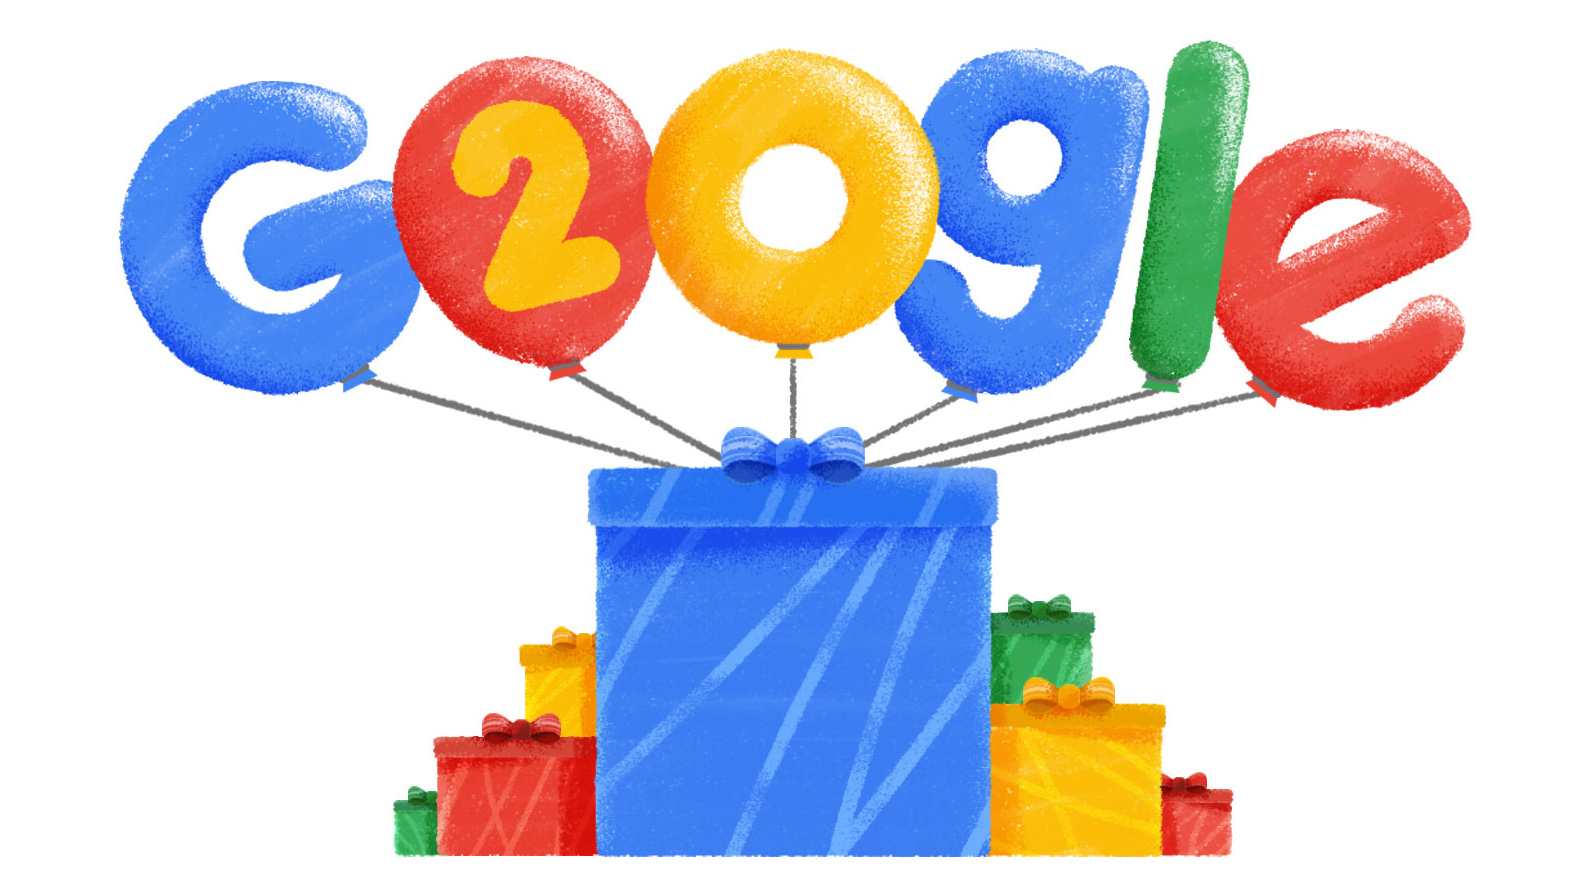 Here are all of the Easter eggs for Google's 20th anniversary and the Google Doodle TechRadar